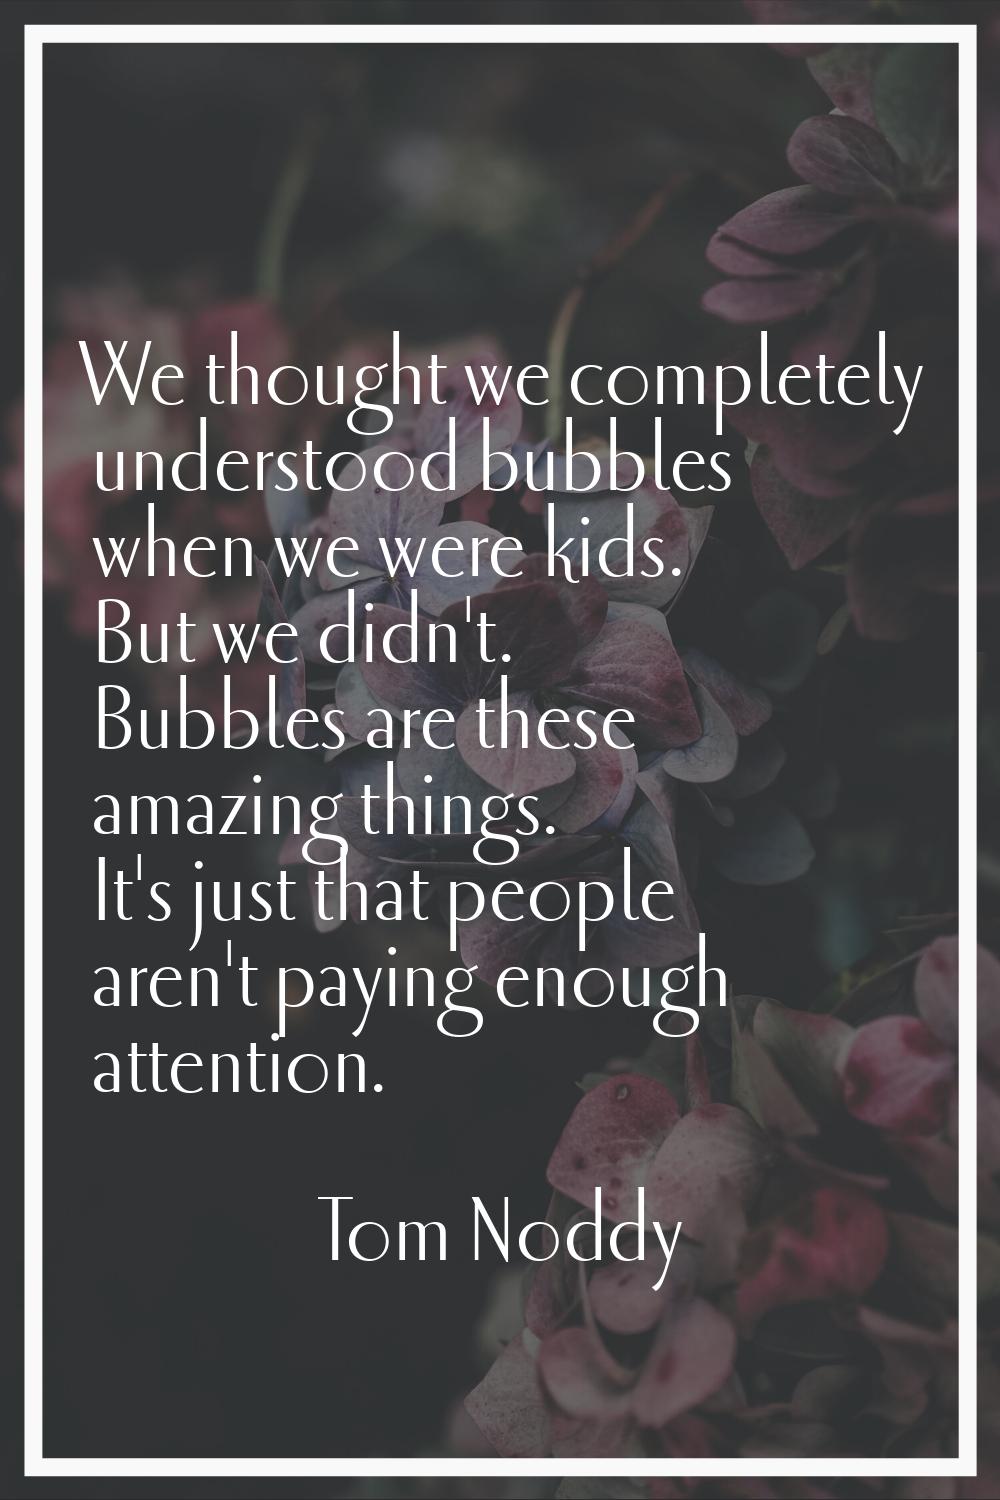 We thought we completely understood bubbles when we were kids. But we didn't. Bubbles are these ama